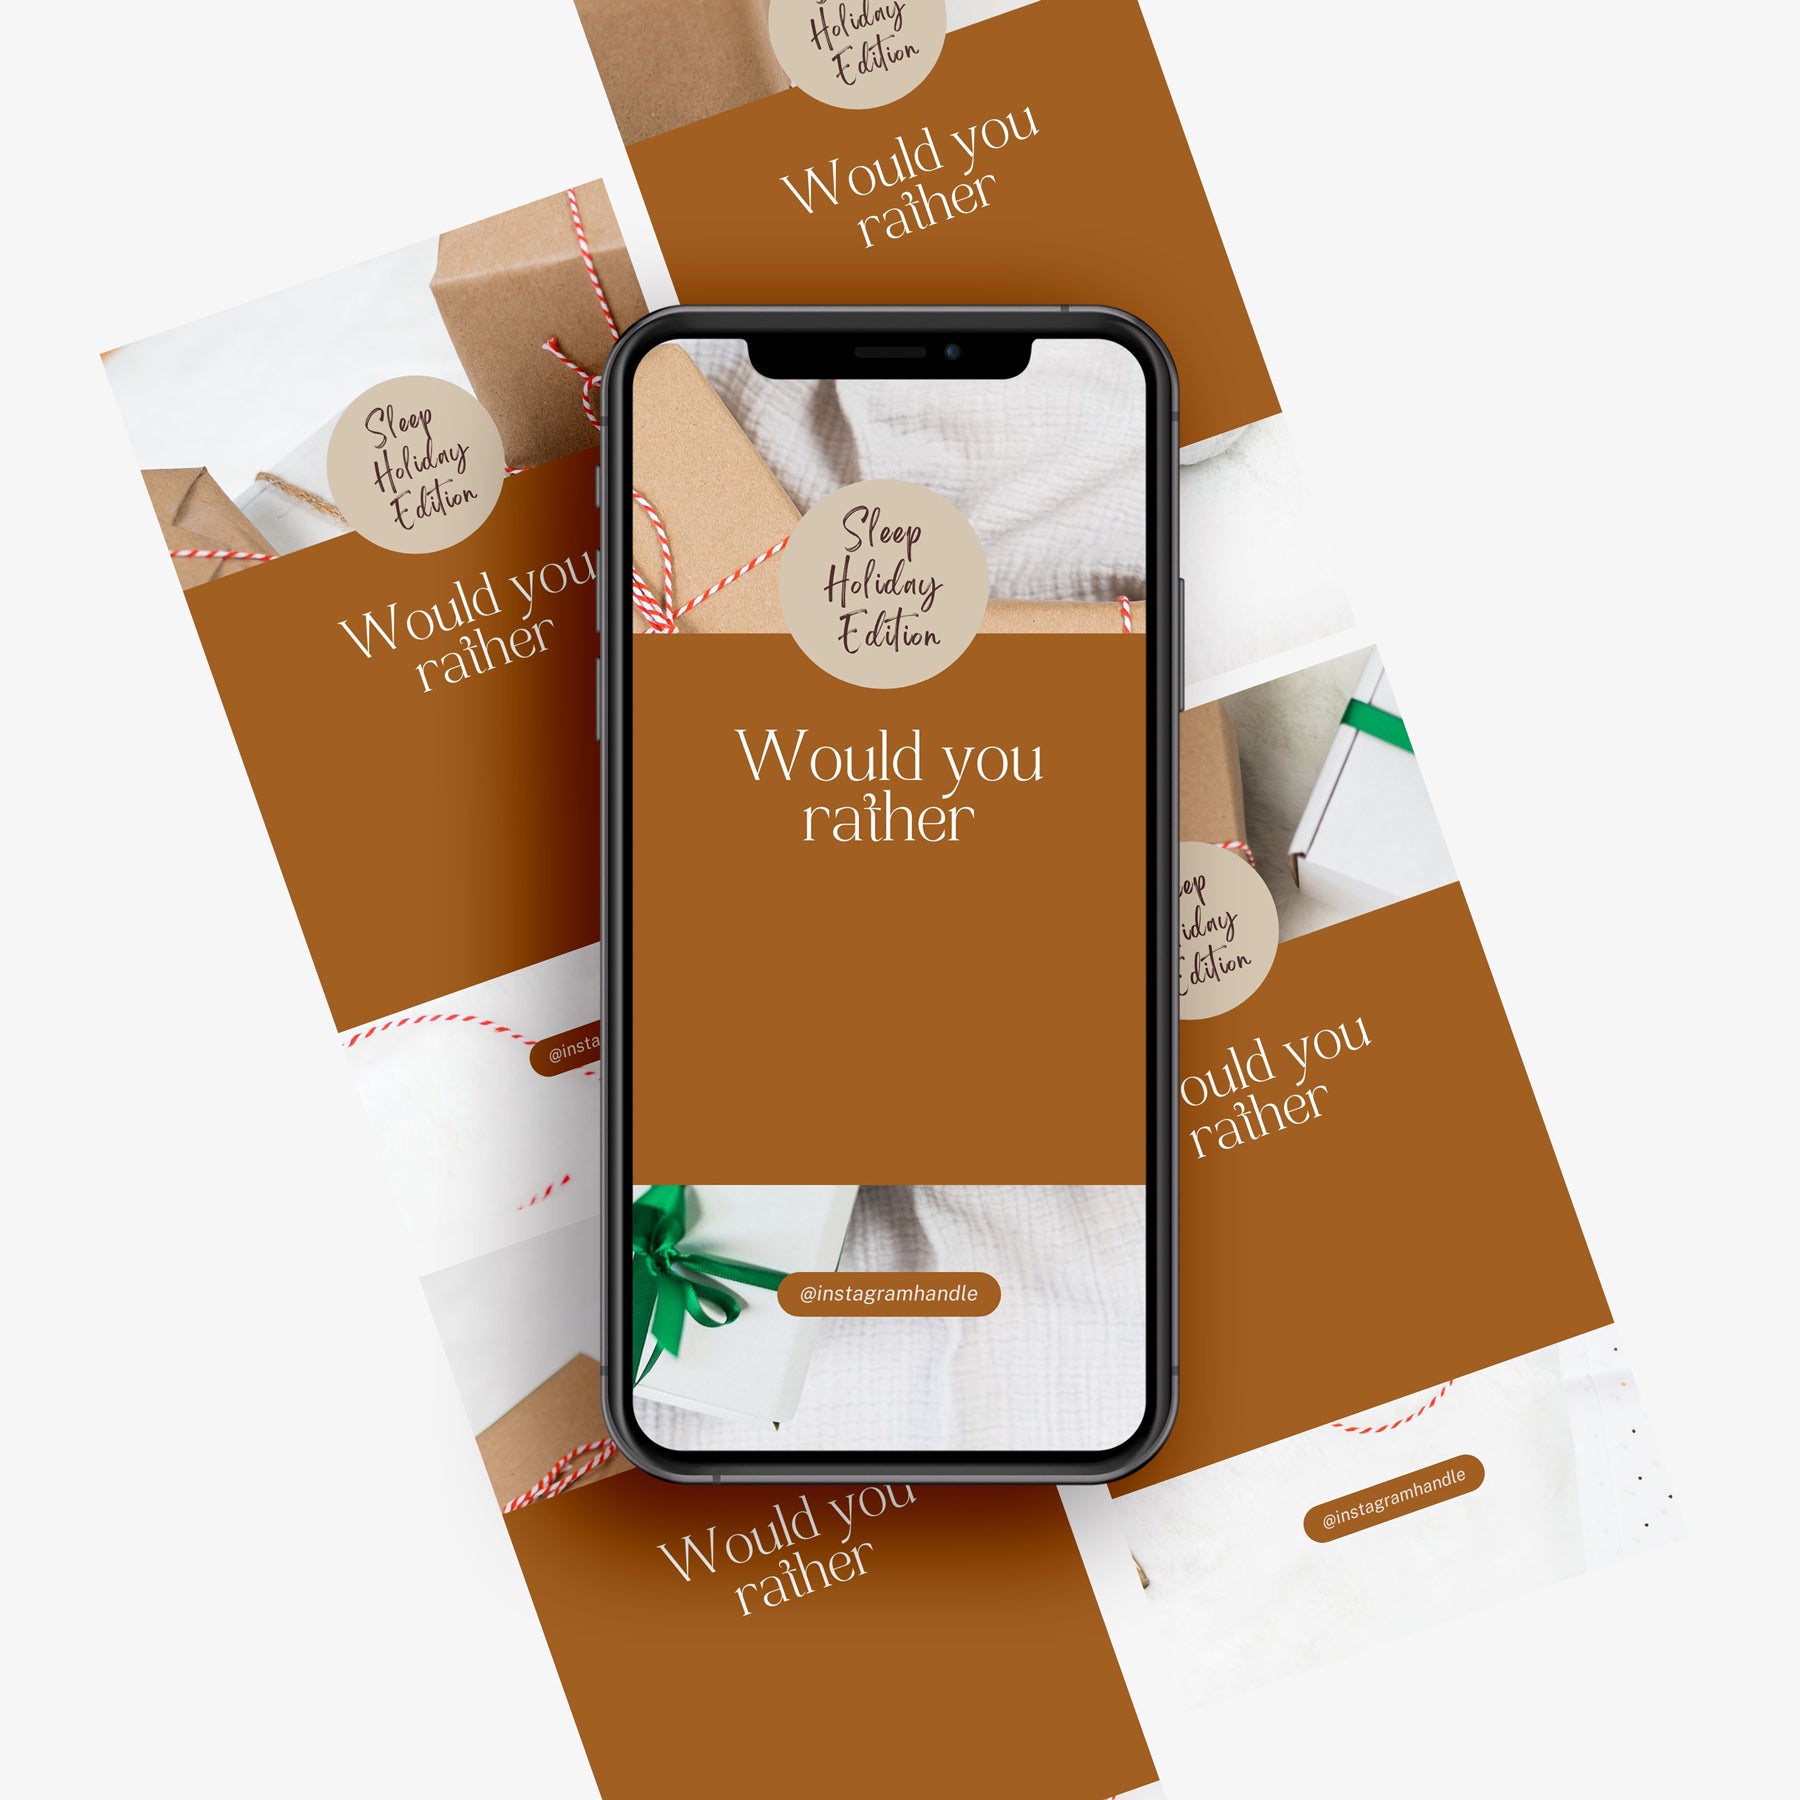 November - Holiday Would You Rather Engagement Instagram Story Canva Template